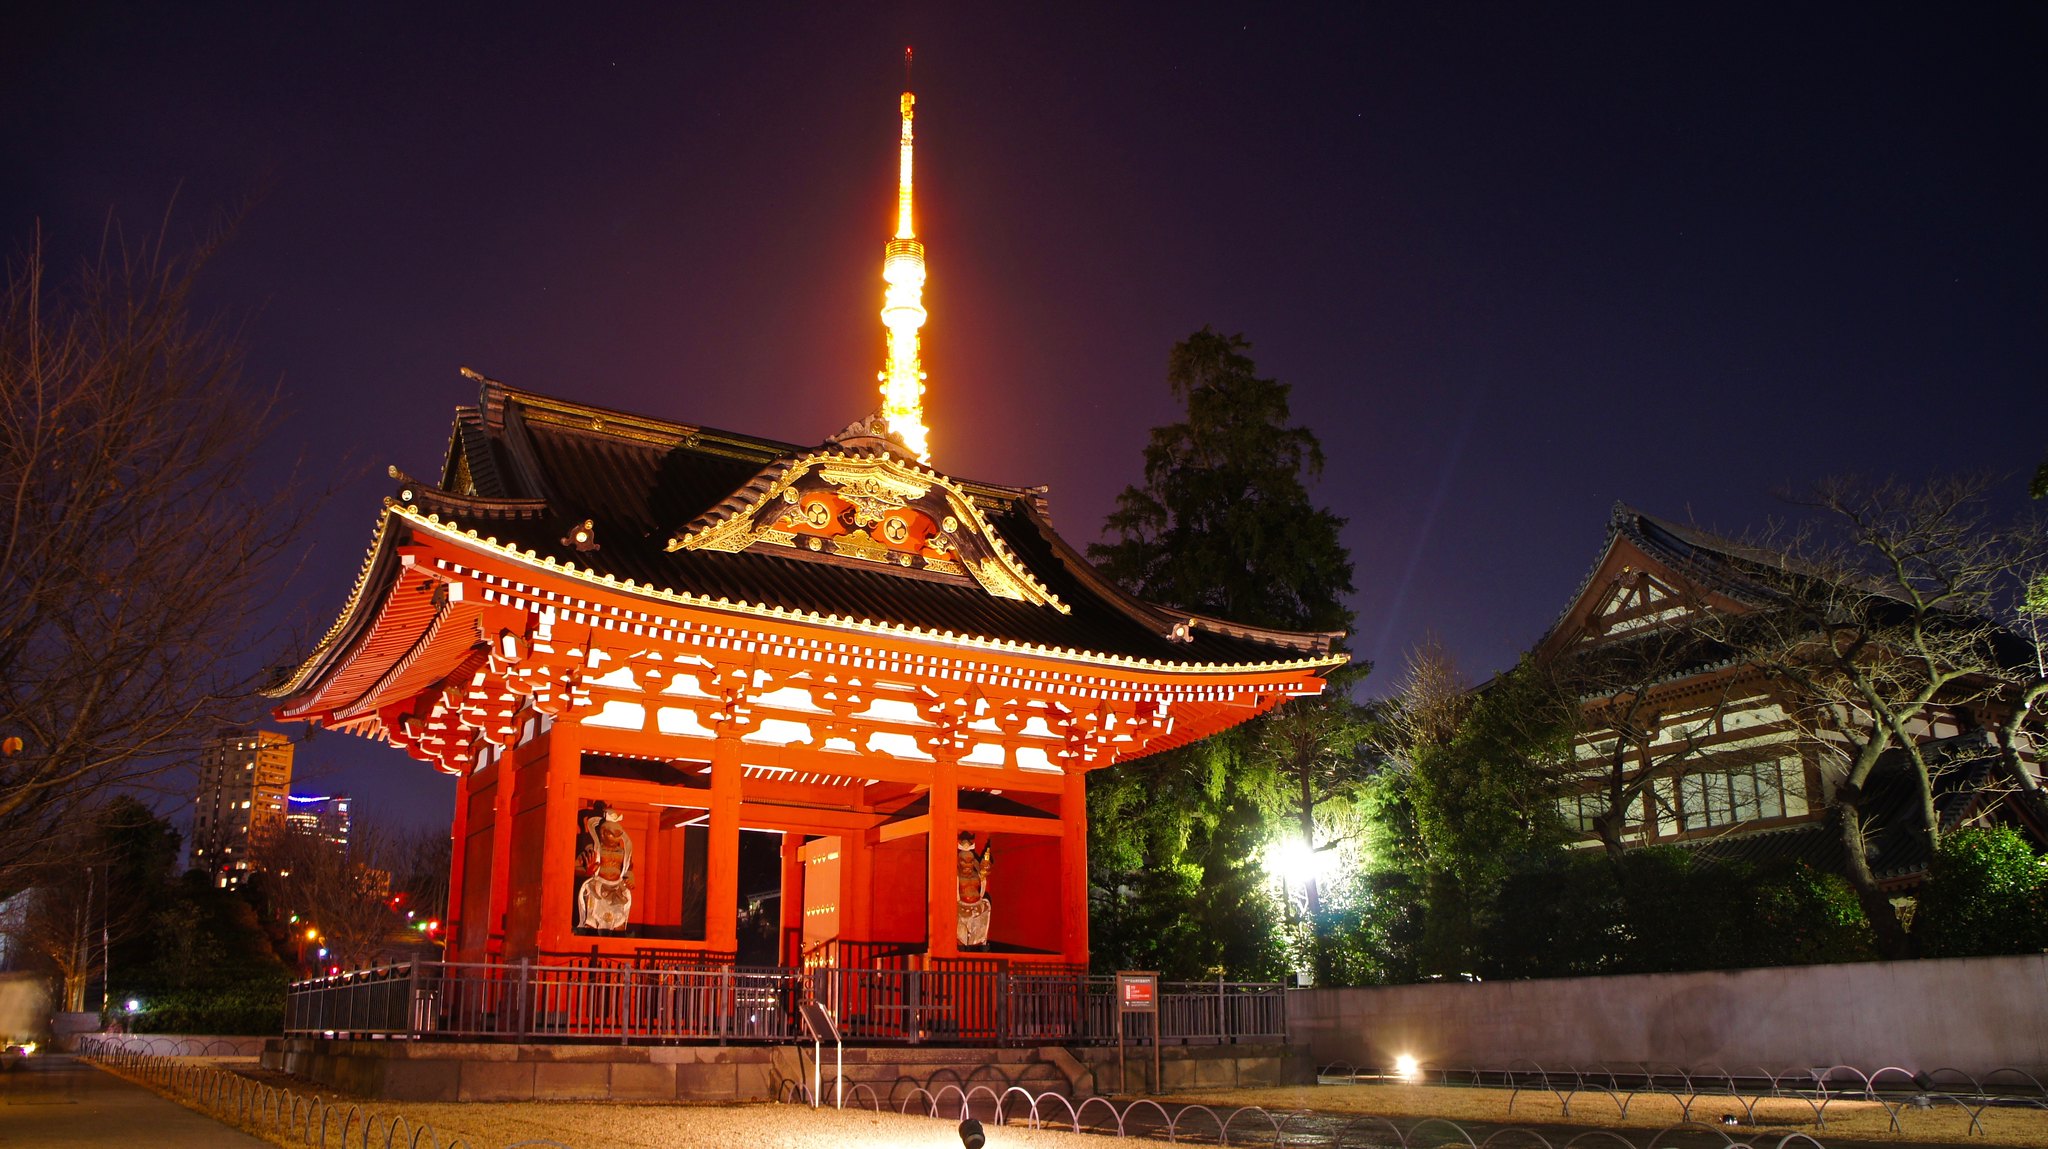 Tokyo Tower and Zojoji Temple